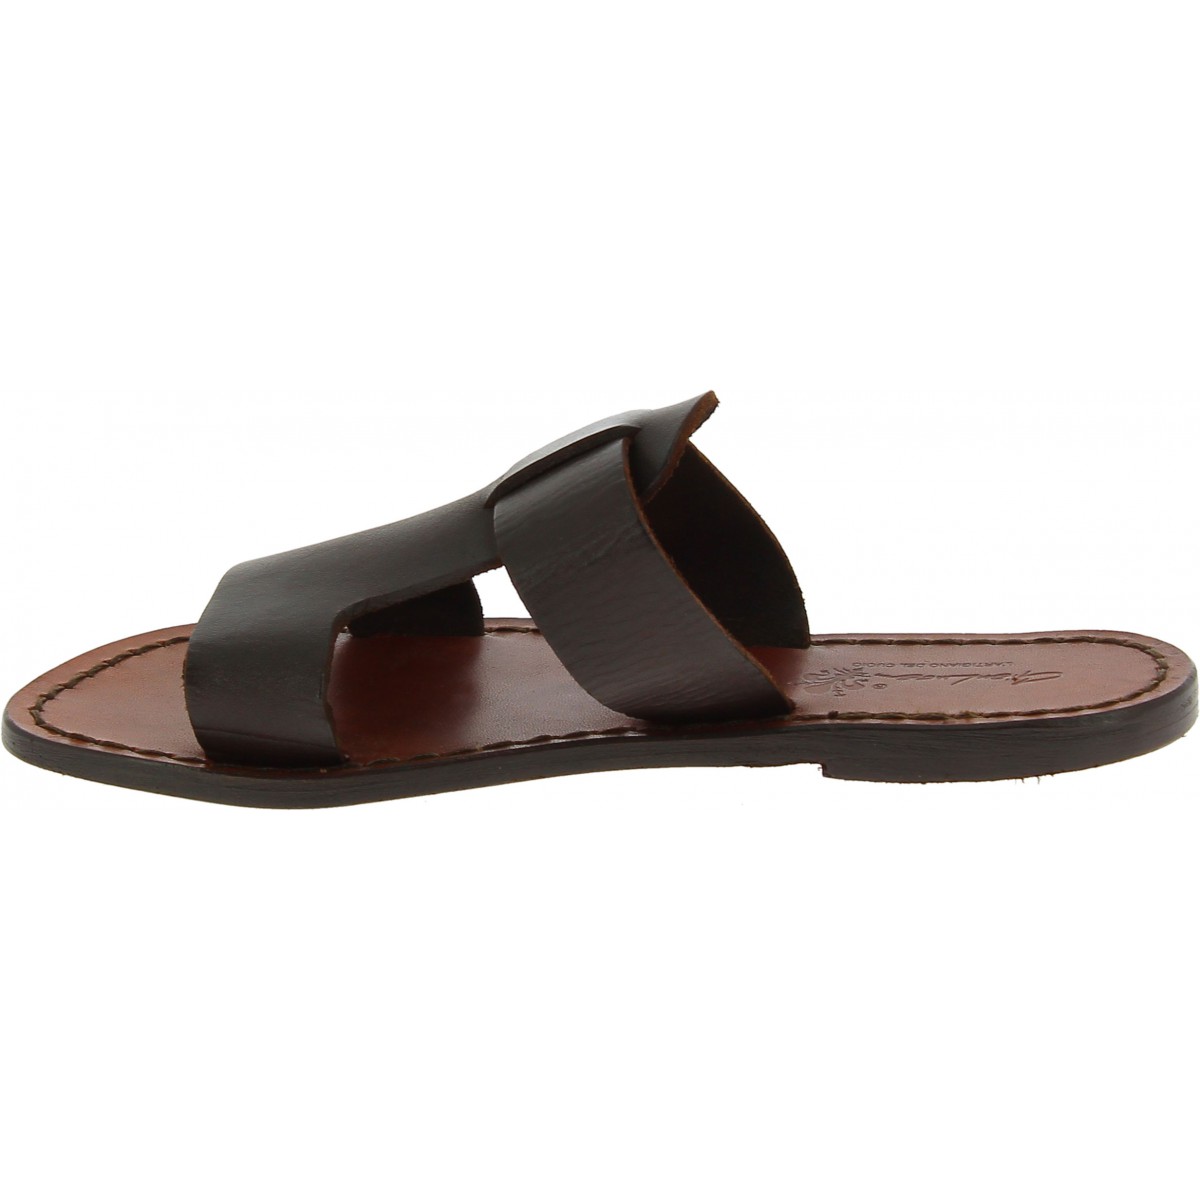 Women's leather slide sandals in dark brown leather handmade | The ...